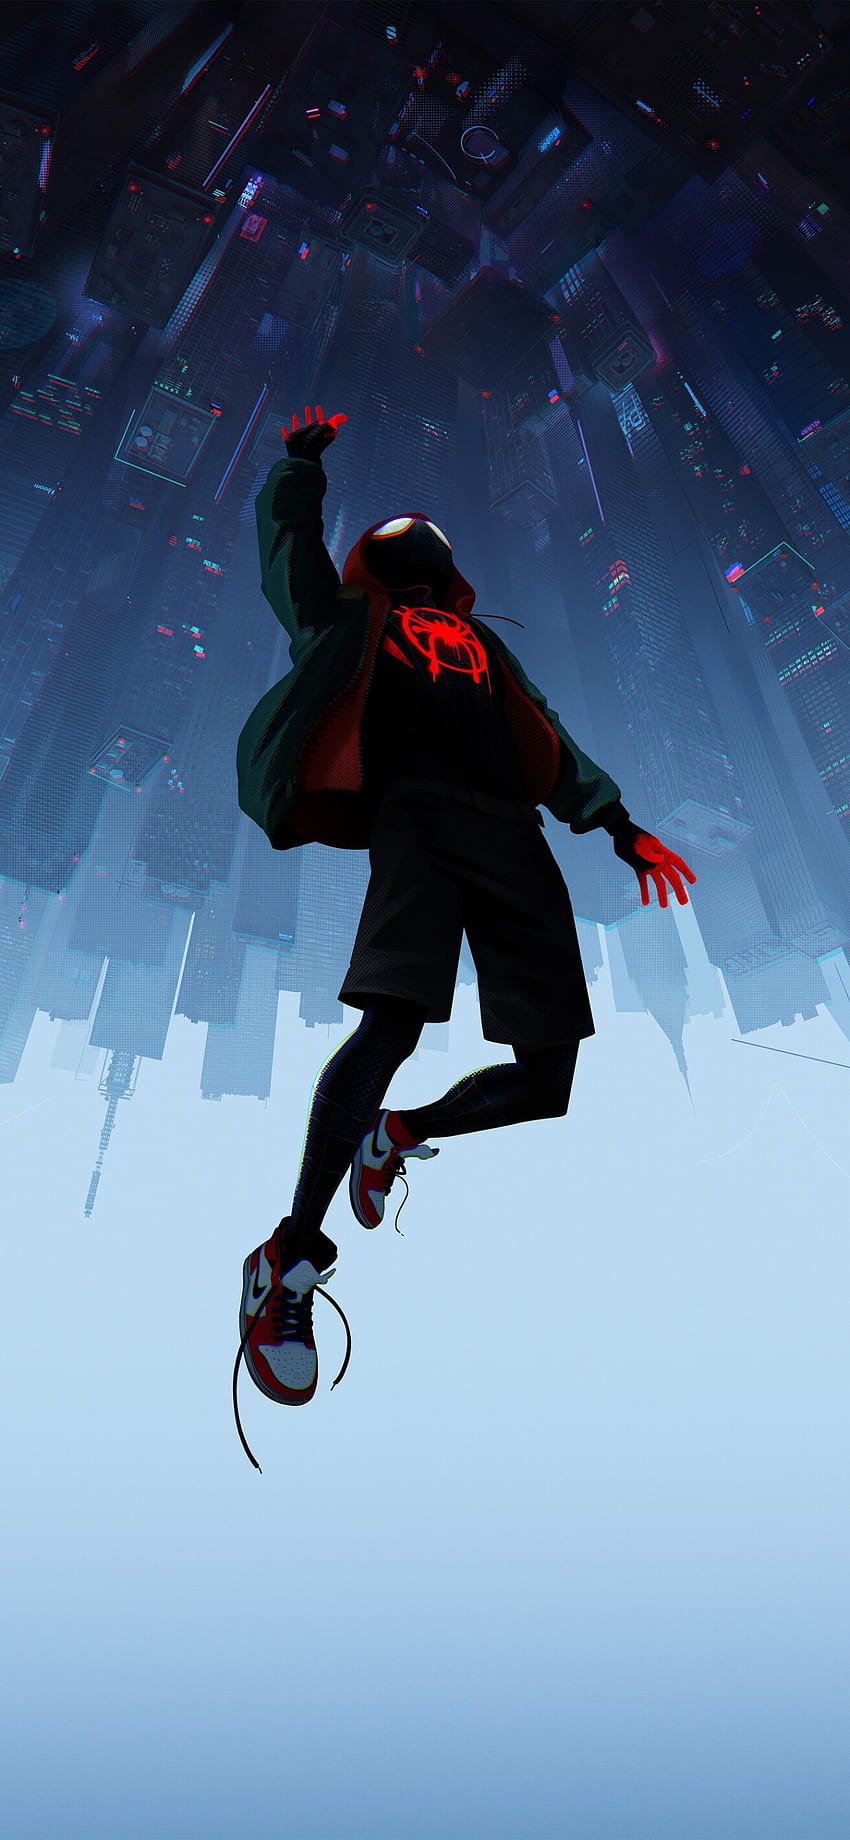 Spider Man: Into The Spider Verse, Upside Down Cityscape, Skyscrapers, Animation, Artwork For IPhone 11 Pro Max & XS Max, Spiderman Upside Down HD phone wallpaper